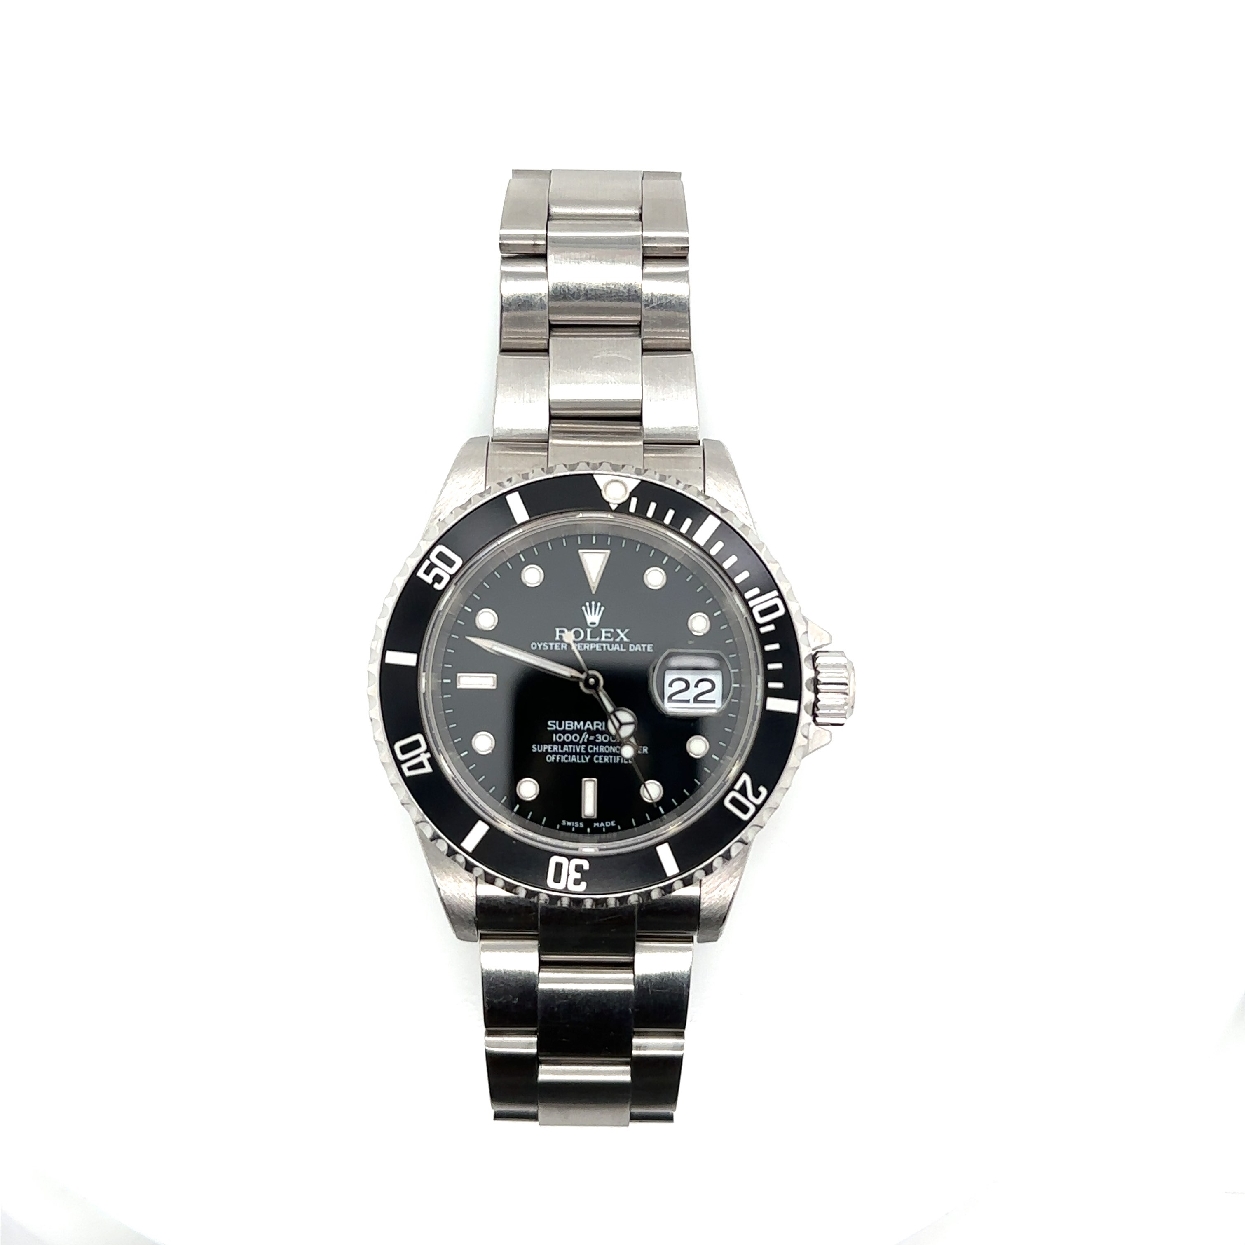 1999 40mm Rolex Submariner Oyster Datejust With Black Dial
Comes with Box and Papers

Reference #16610
Serial # A746575
